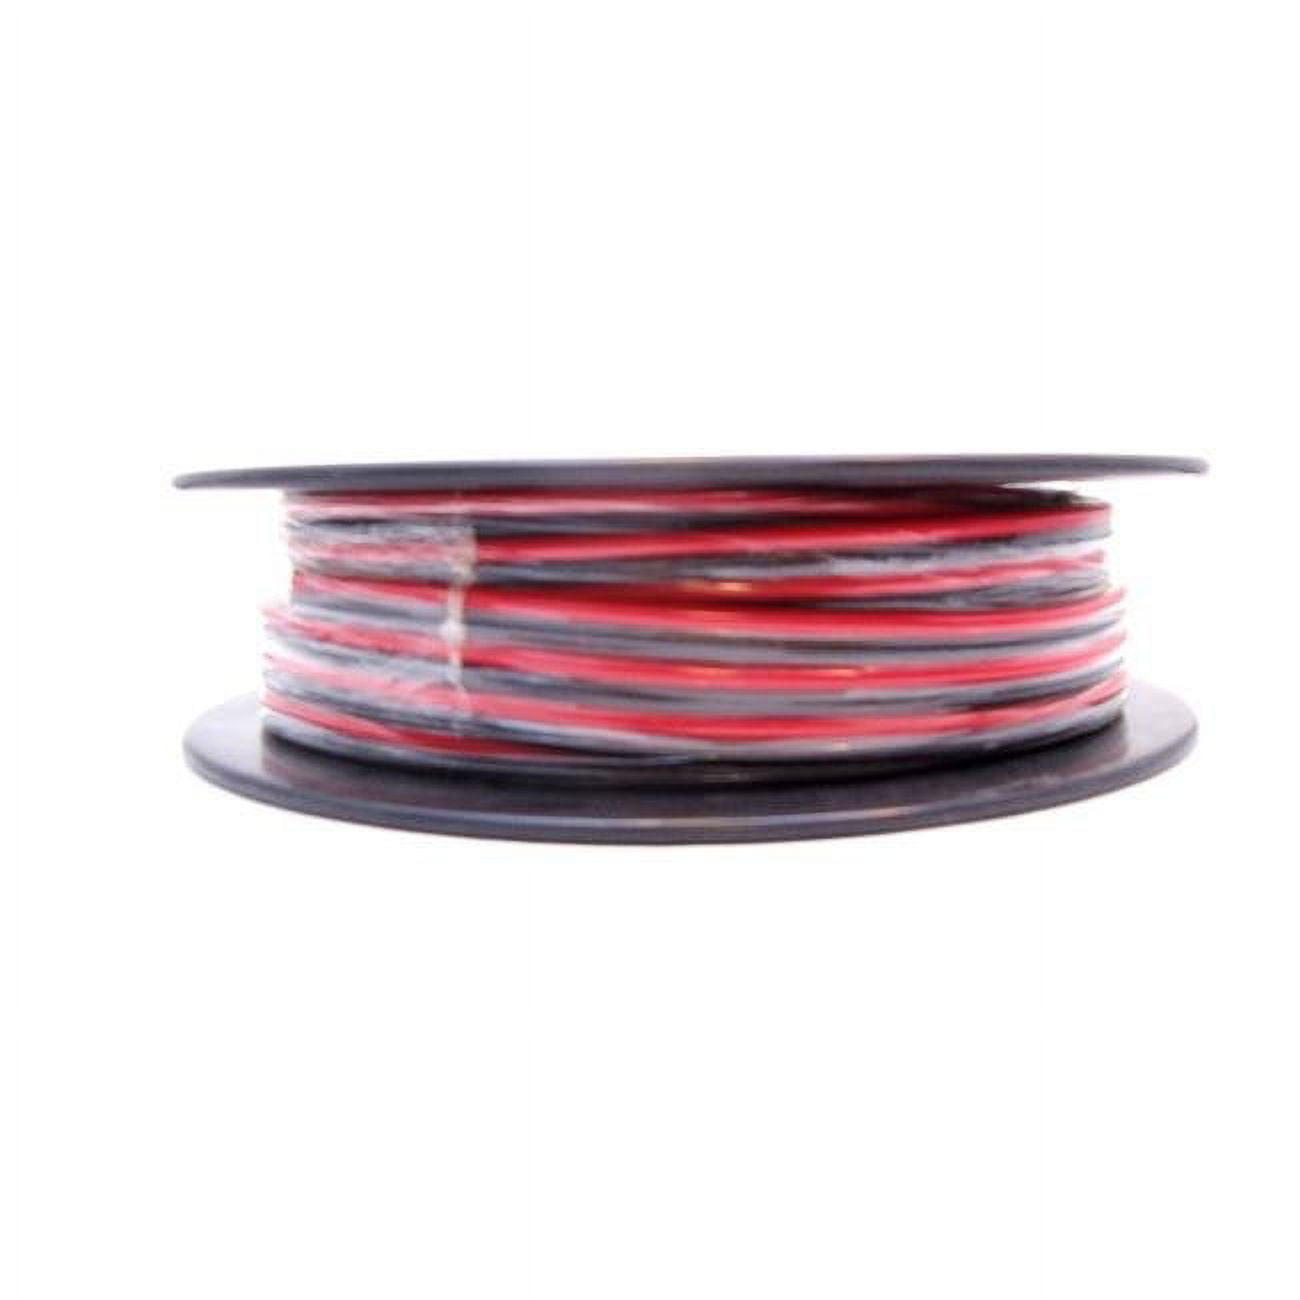 Picture of Twinpoint 12RB1 Workman 100 ft. Spool of 12 Gauge DC Zip Wire, Red & Black